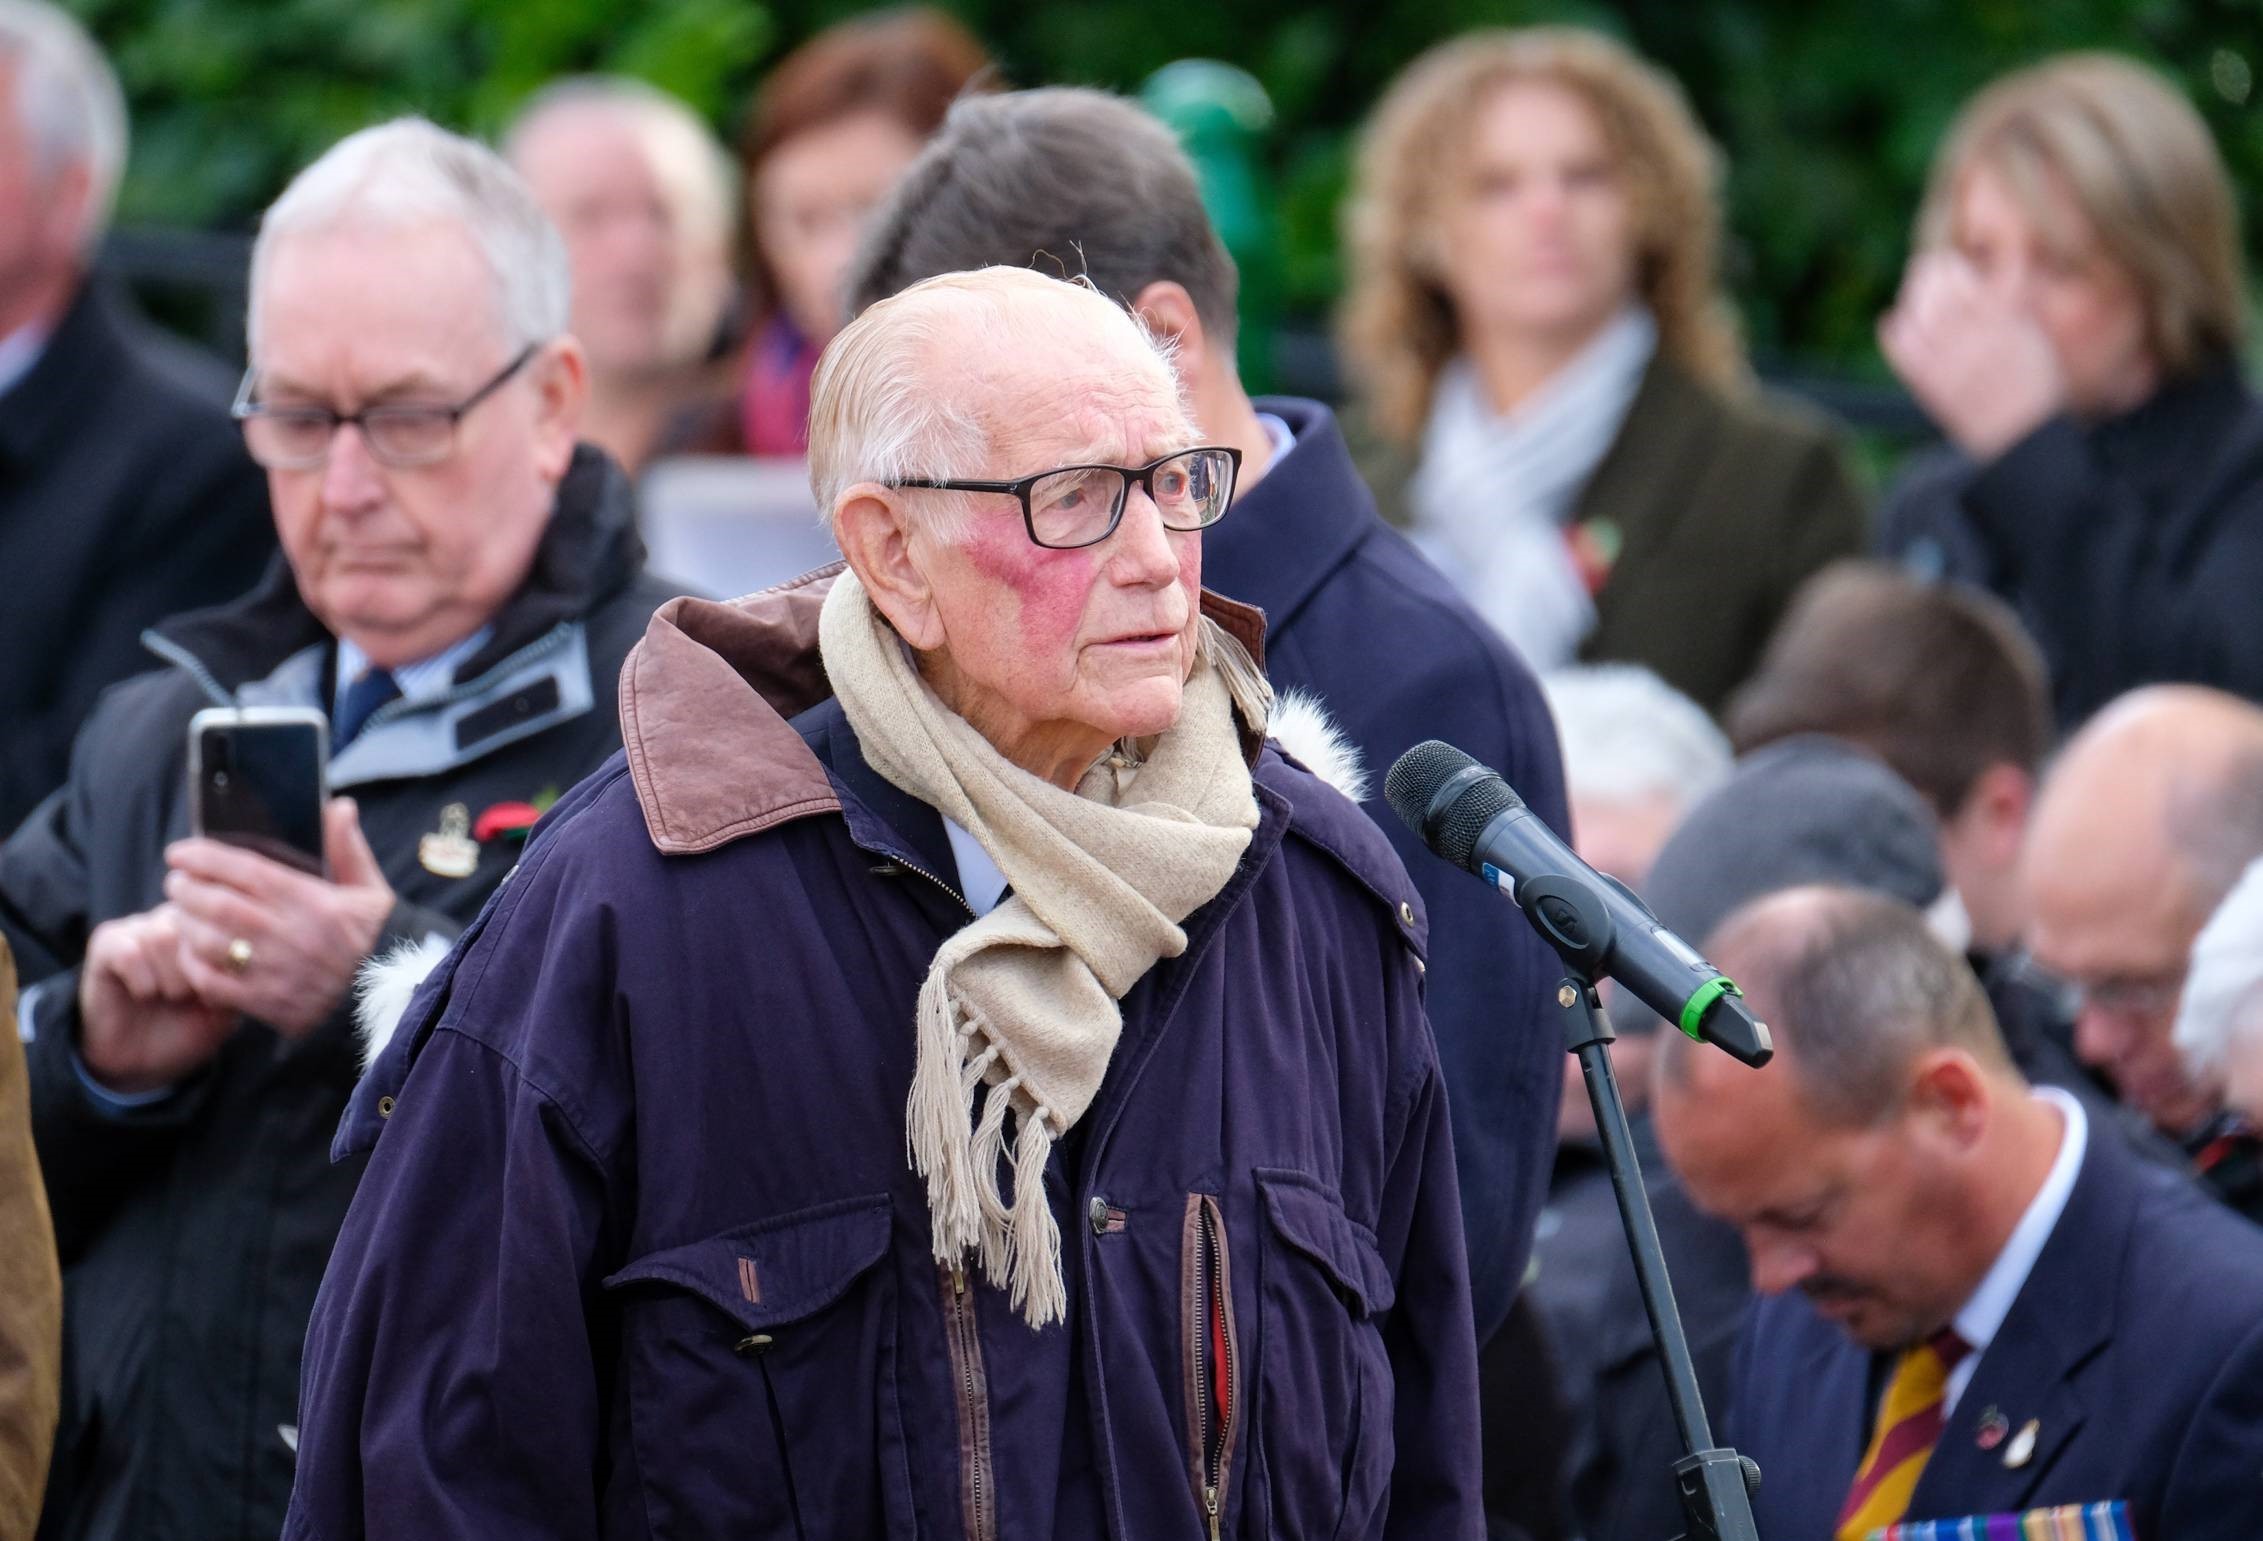 Dated: 10/11/19..The Sunderland Remembrance Parade 2019 takes place today (Sun) next to the War Memorial on Burdon Road. This picture shows Len Gibson, a 99-year-old Second World War veteran and former Japanese prisoner of war who helped lead the